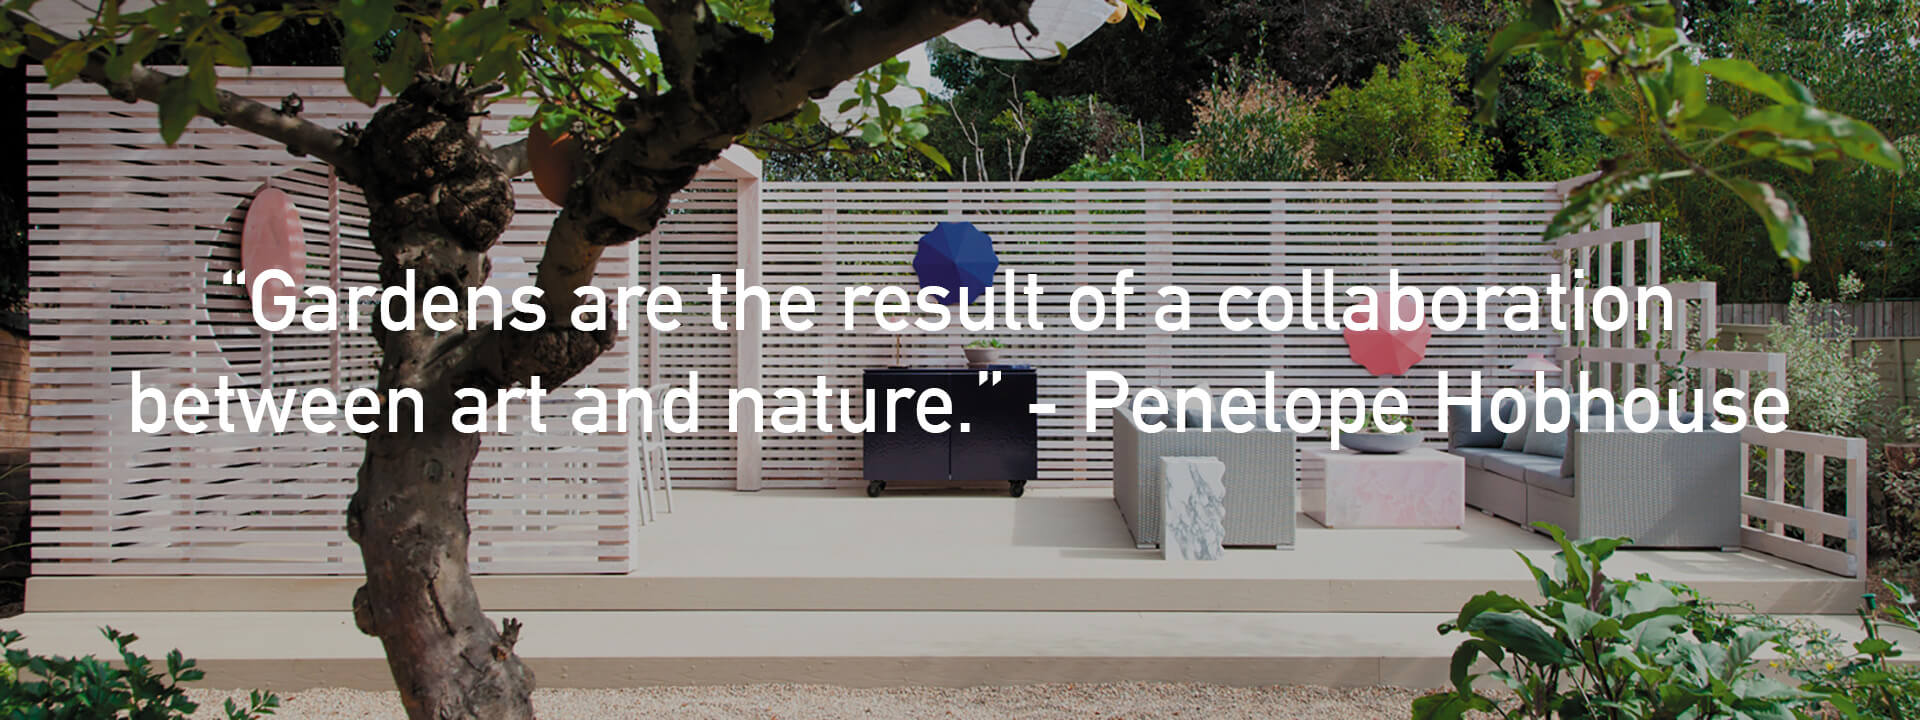 “Gardens are the result of a collaboration between art and nature.” - Penelope Hobhouse